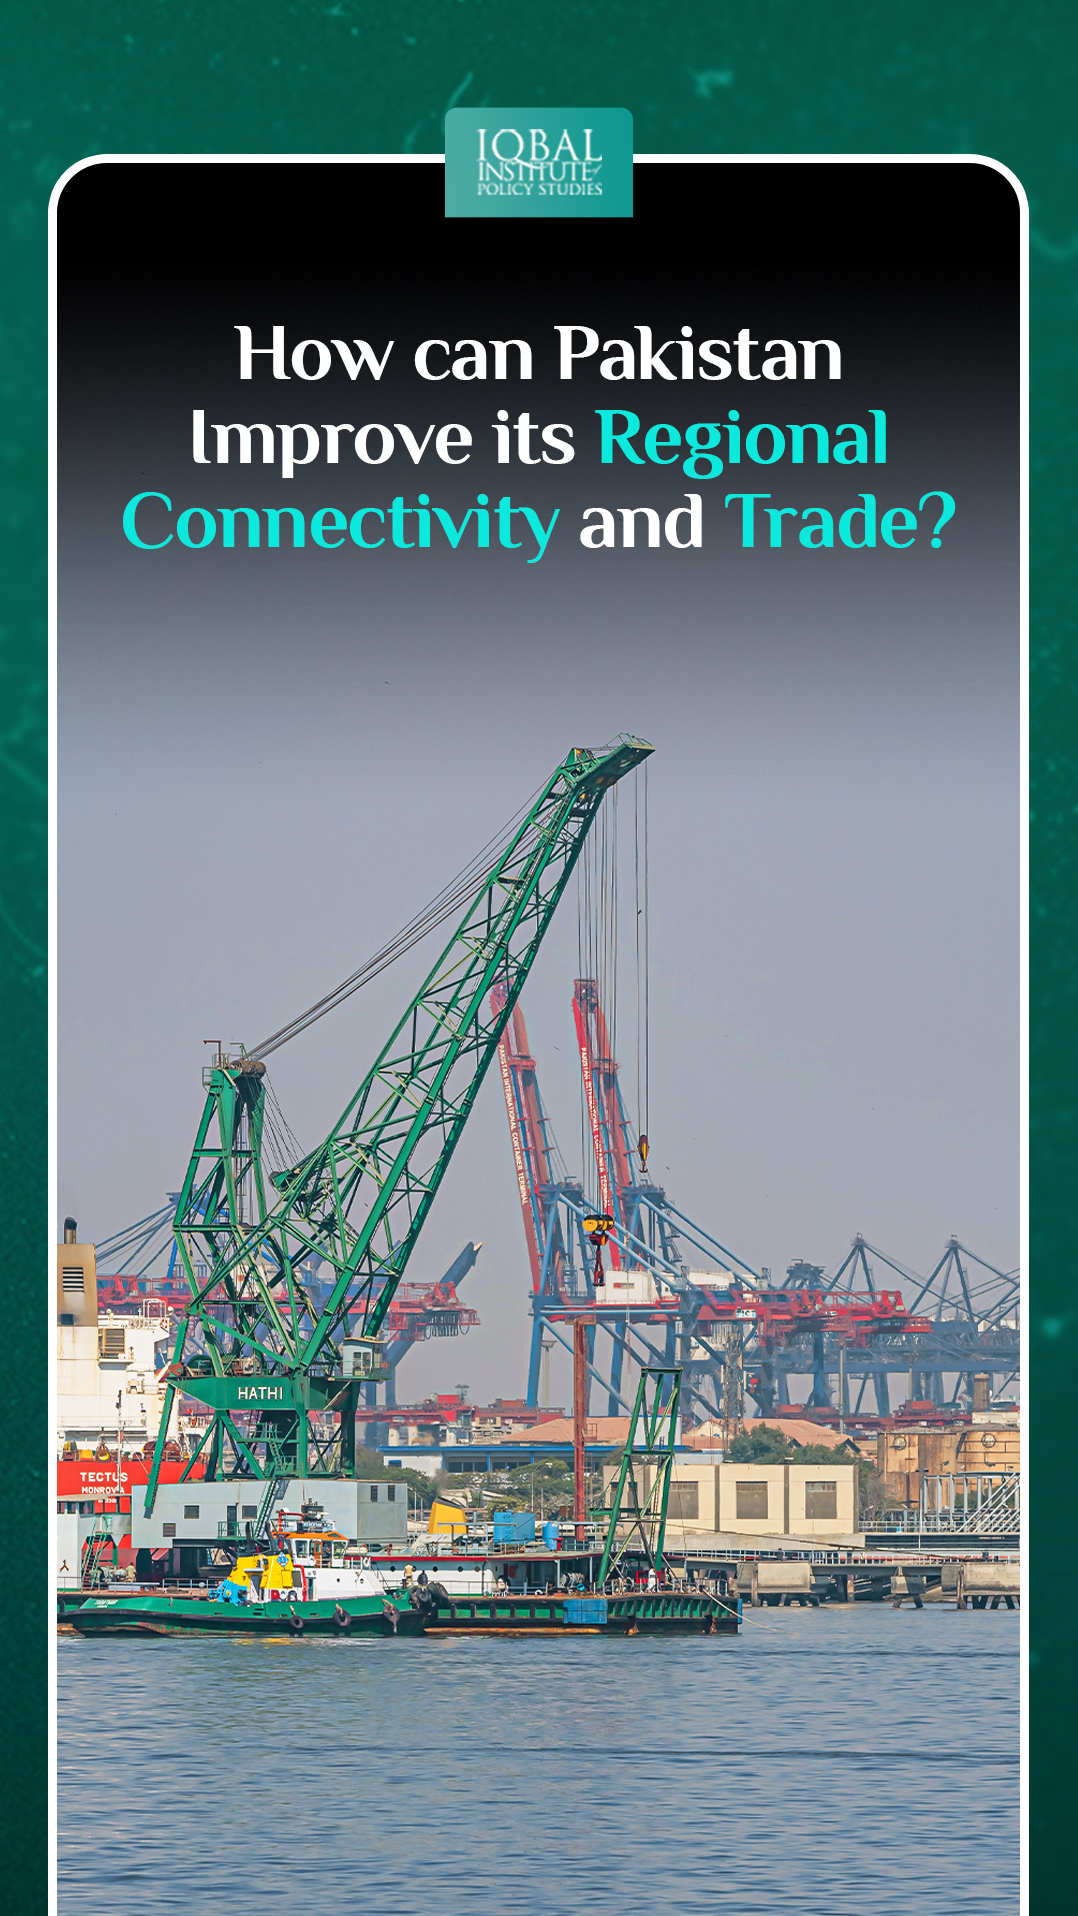 How can Pakistan improve its Regional Connectivity and Trade?